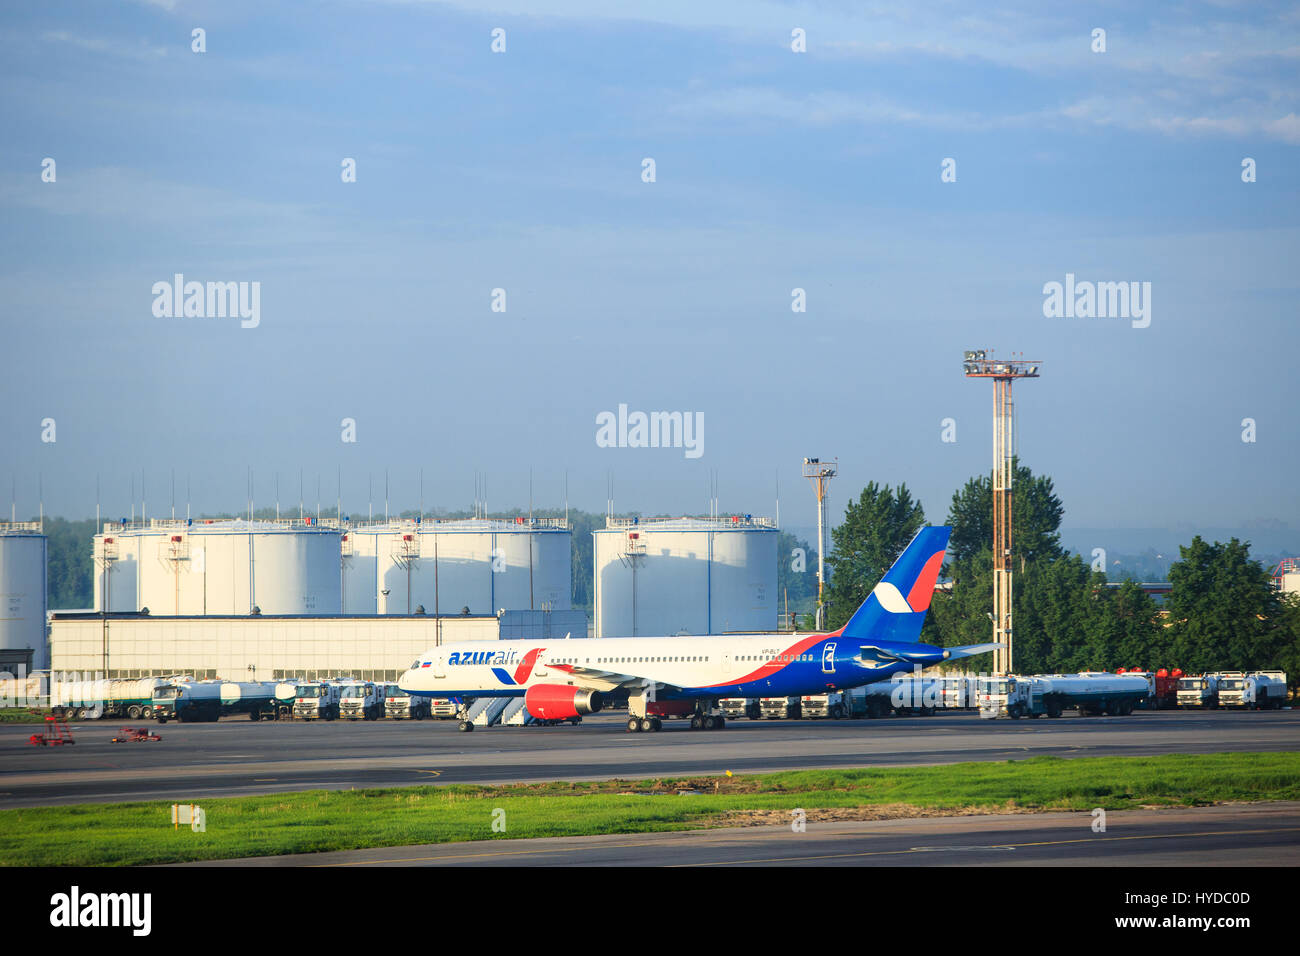 Moscow, Russia - May 27, 2016: Azurair aircraft in the Domodedovo airport parking Stock Photo